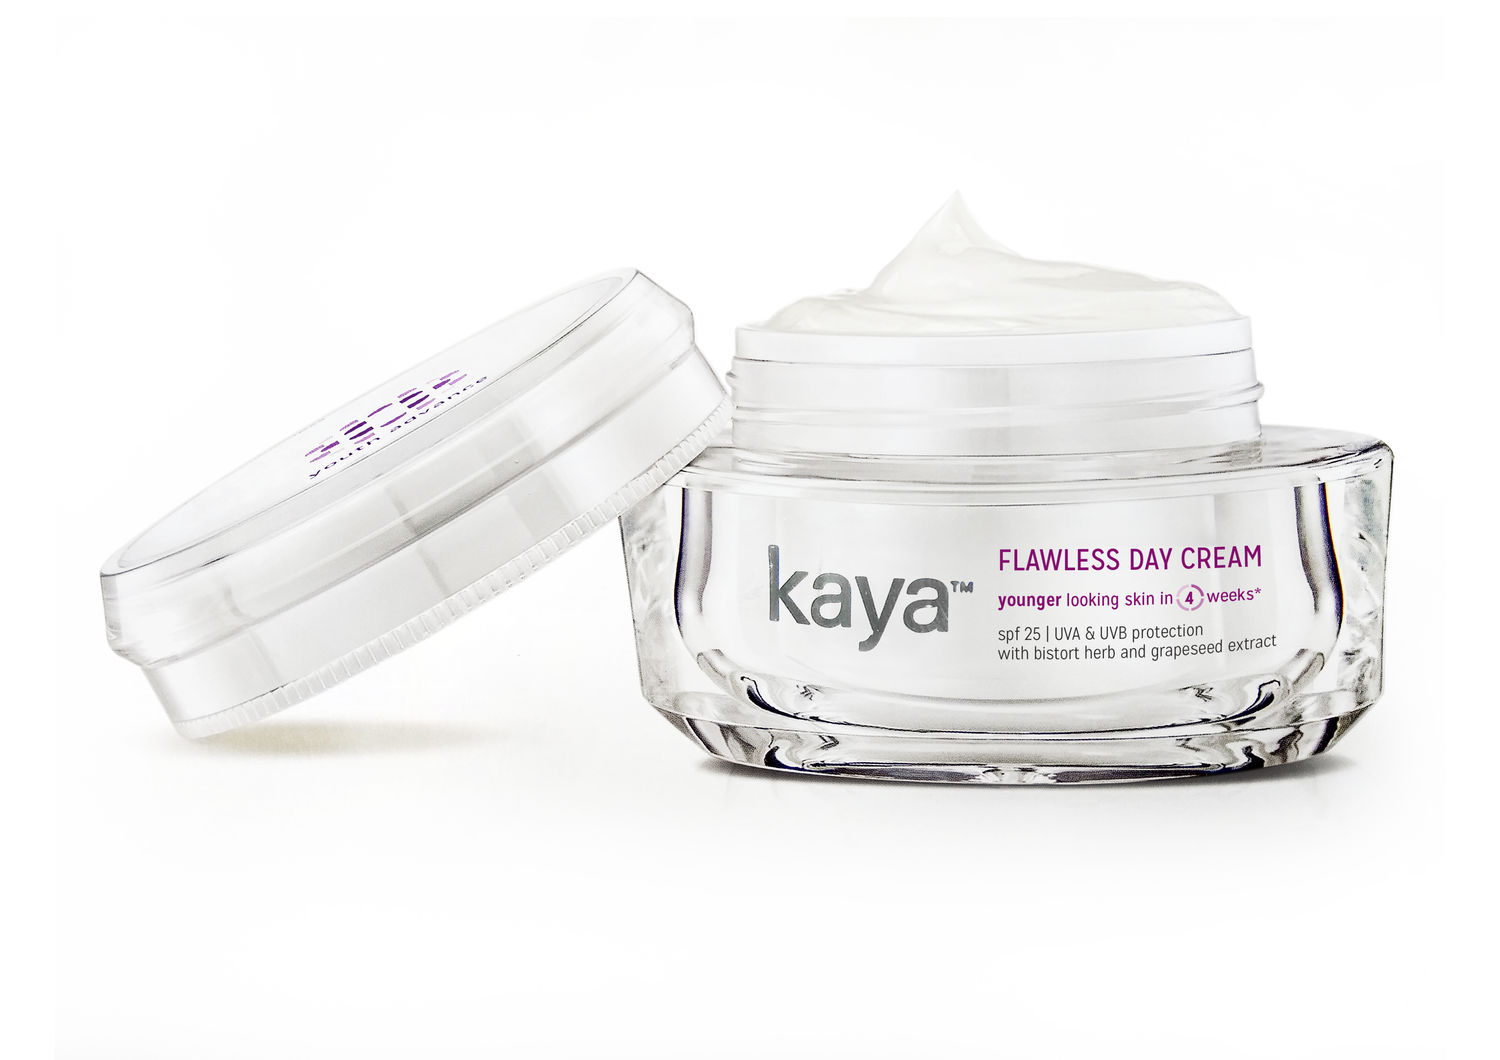 Buy Kaya Clinic Flawless Day Cream, Daily moisturizer with SPF 25, 4 Star Boots Rating, Protects skin from fine lines, age spots 50g - Purplle